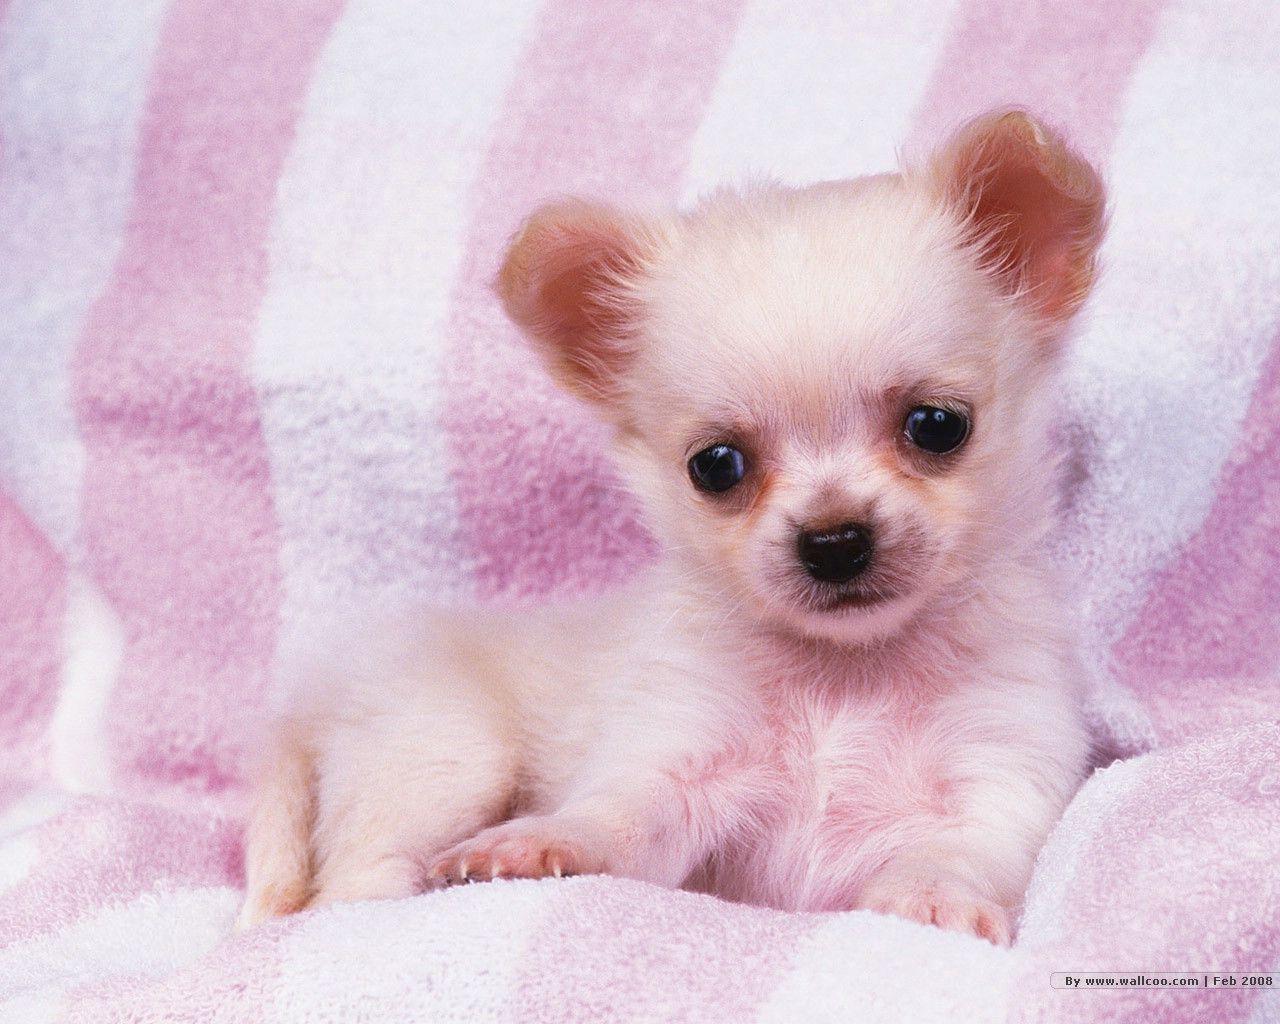 Cute Puppy Wallpaper and Background